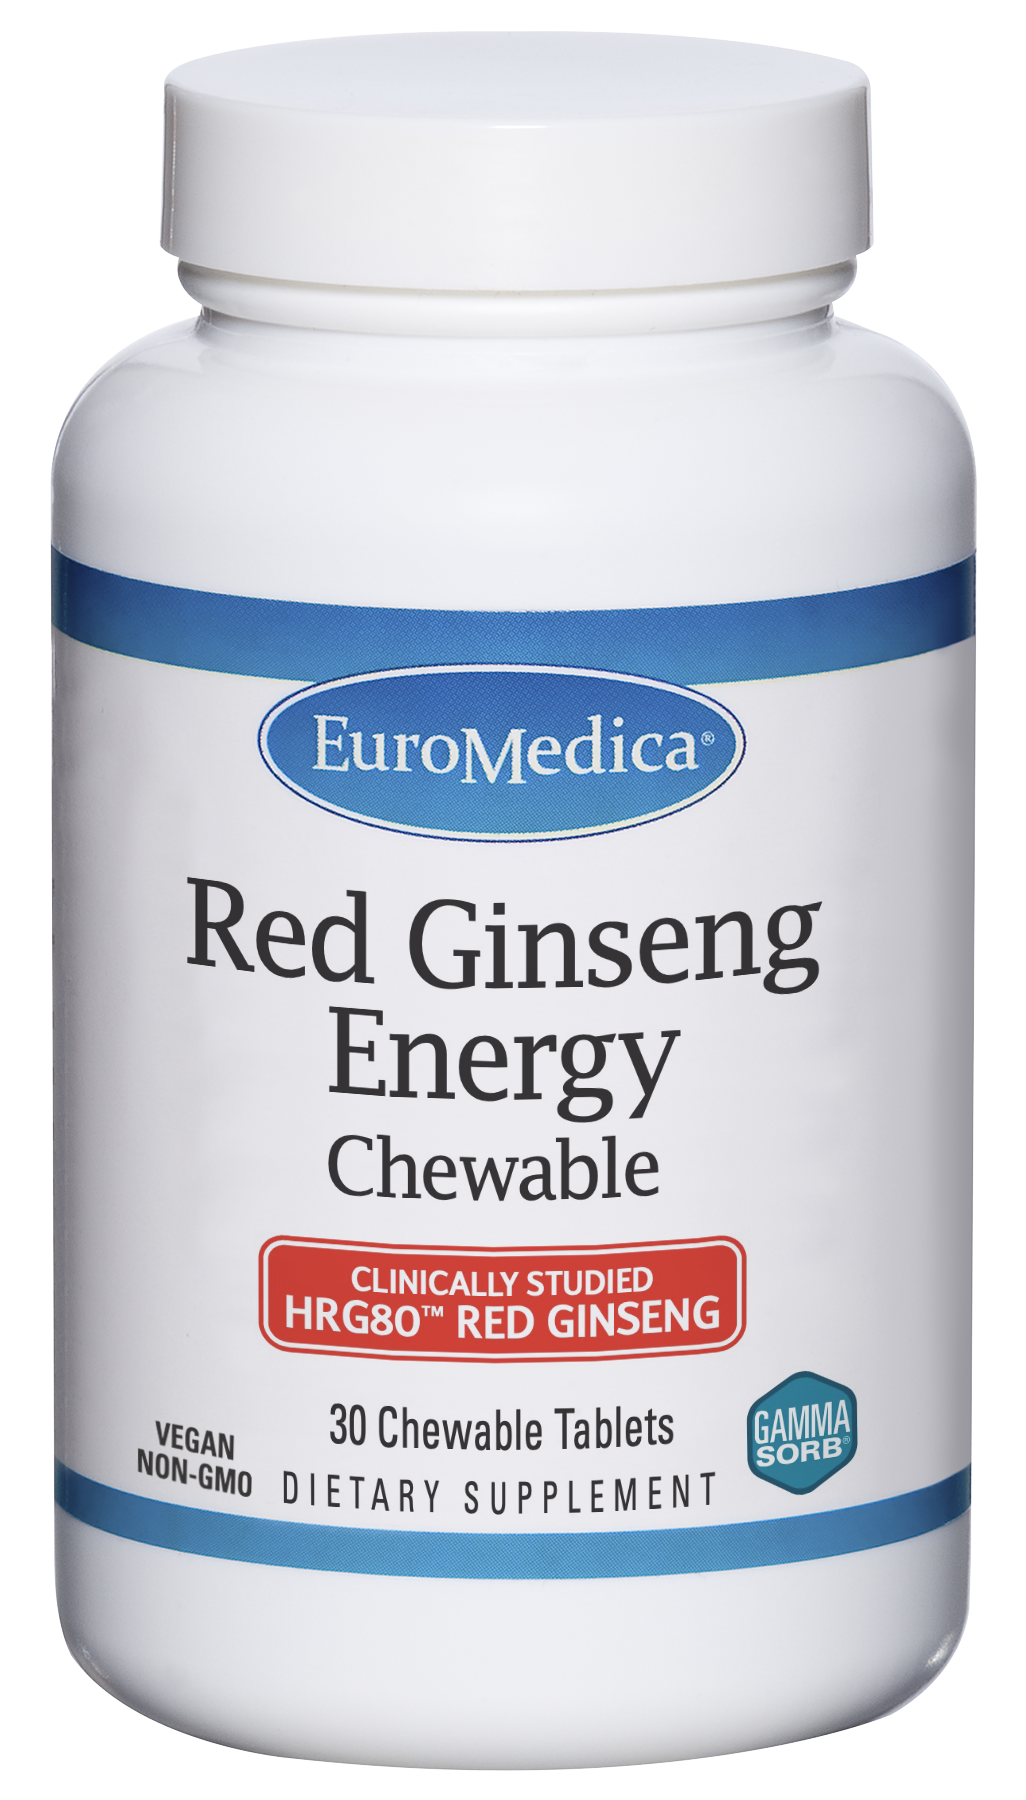 Red Ginseng Energy Chewable bottle image